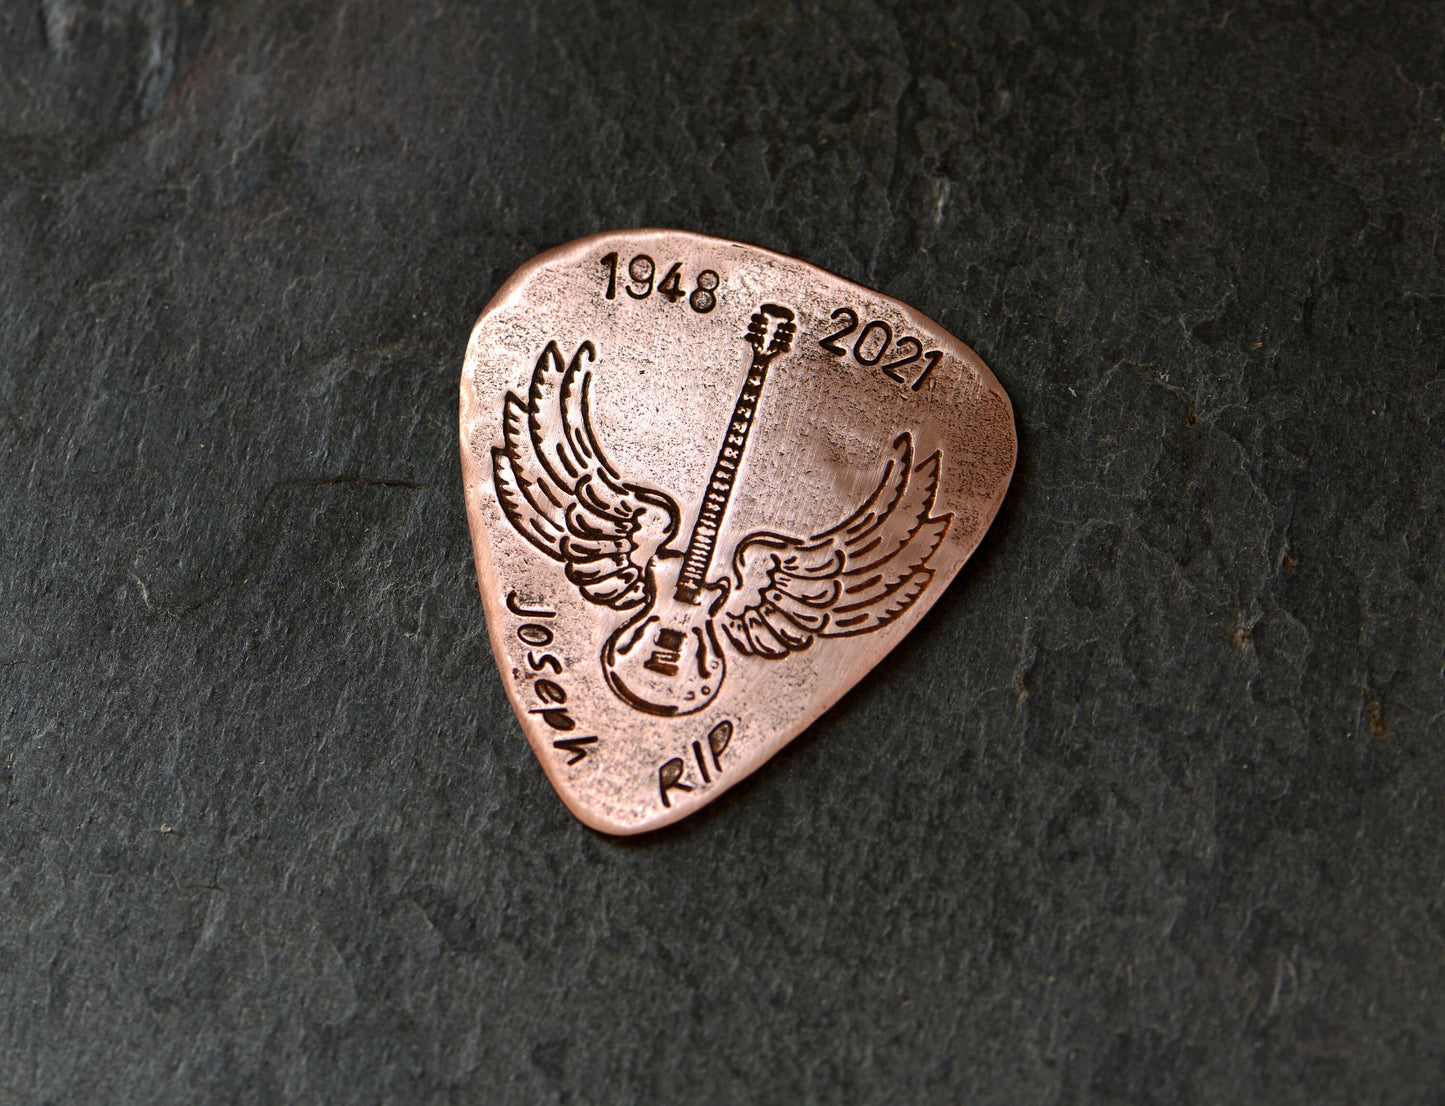 Memorial winged guitar on pick with custom date and name